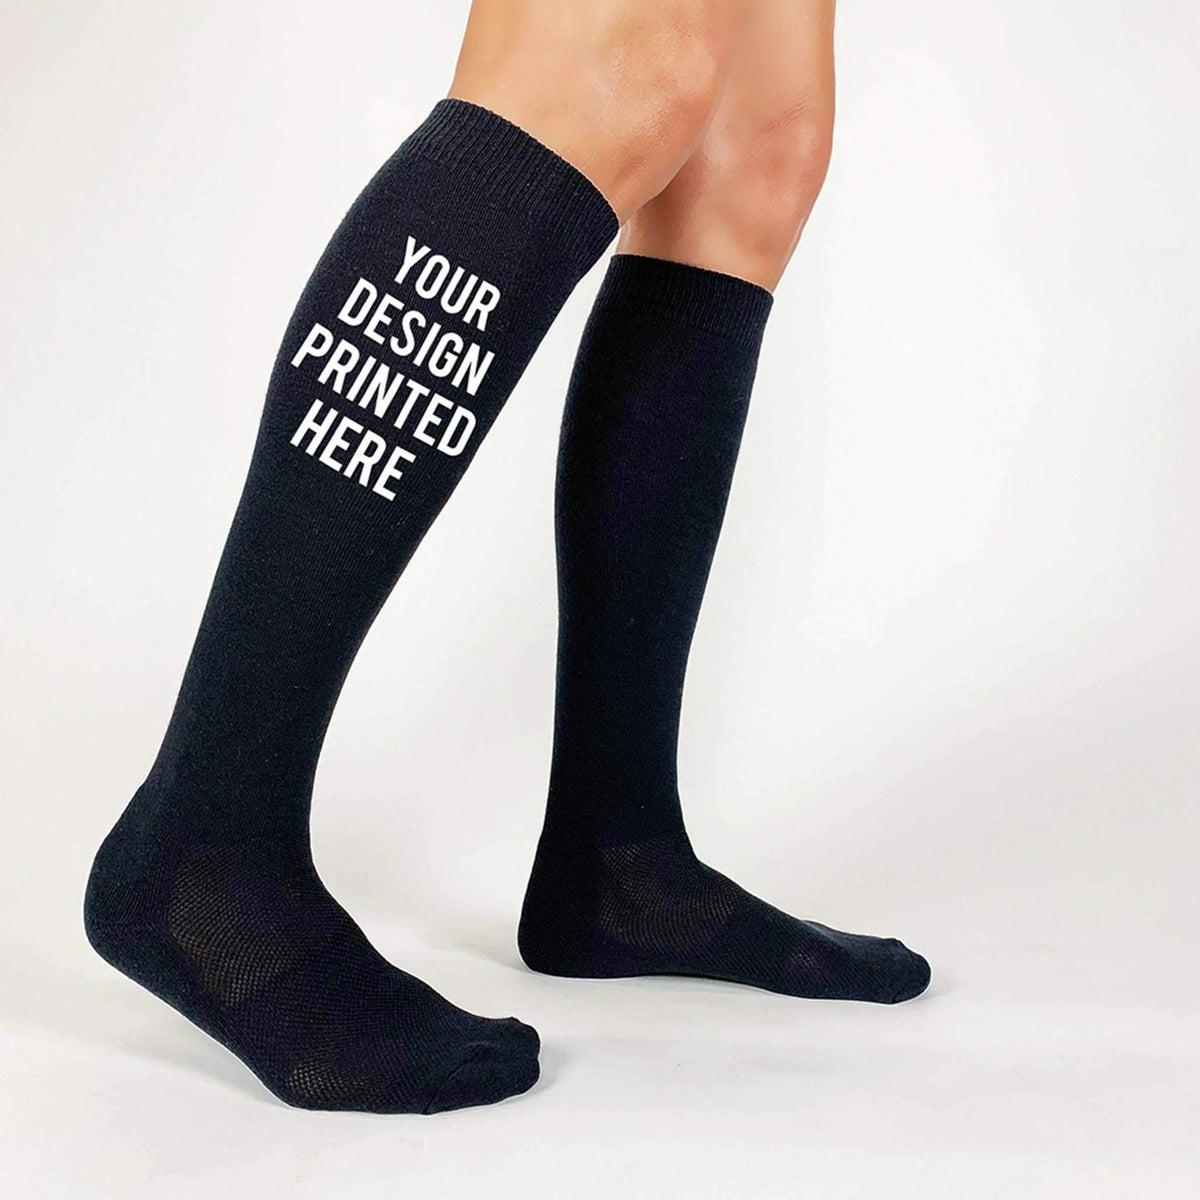 Custom Baseball Socks to Match Your Uniform. Create Your Own Personalized Socks with Your Team's Logo, Text, Design, and Colors.